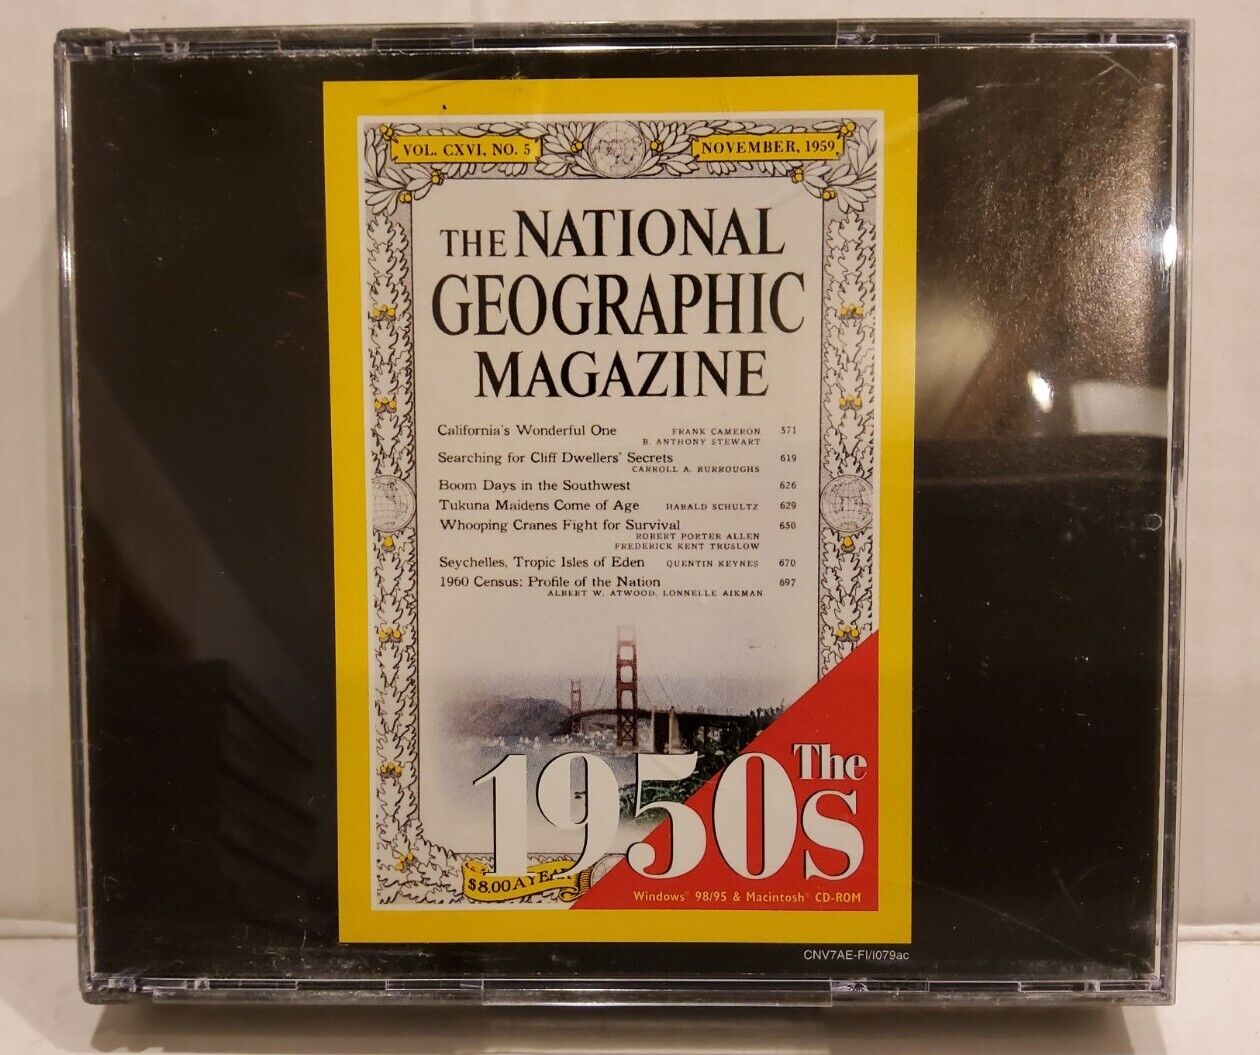 National Geographic Interactive CD-ROM, The 1950s, Broderbund, Pre-owned